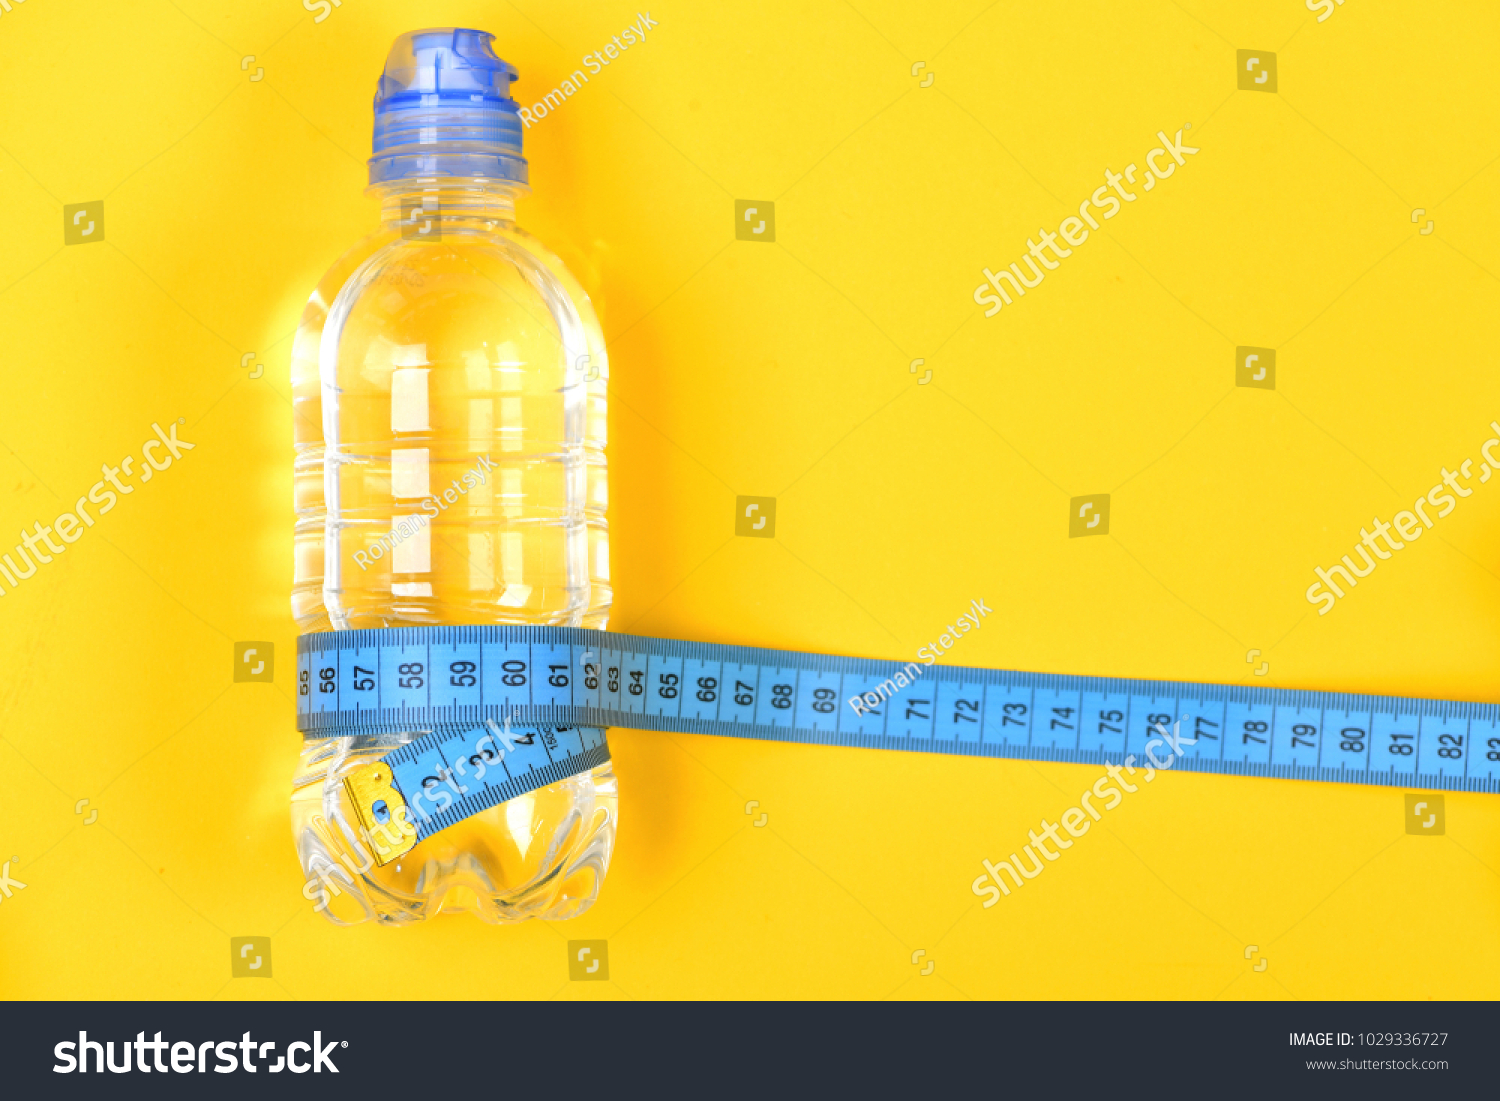 Download Bottle Water Fitness Equipment On Yellow Stock Photo Edit Now 1029336727 PSD Mockup Templates